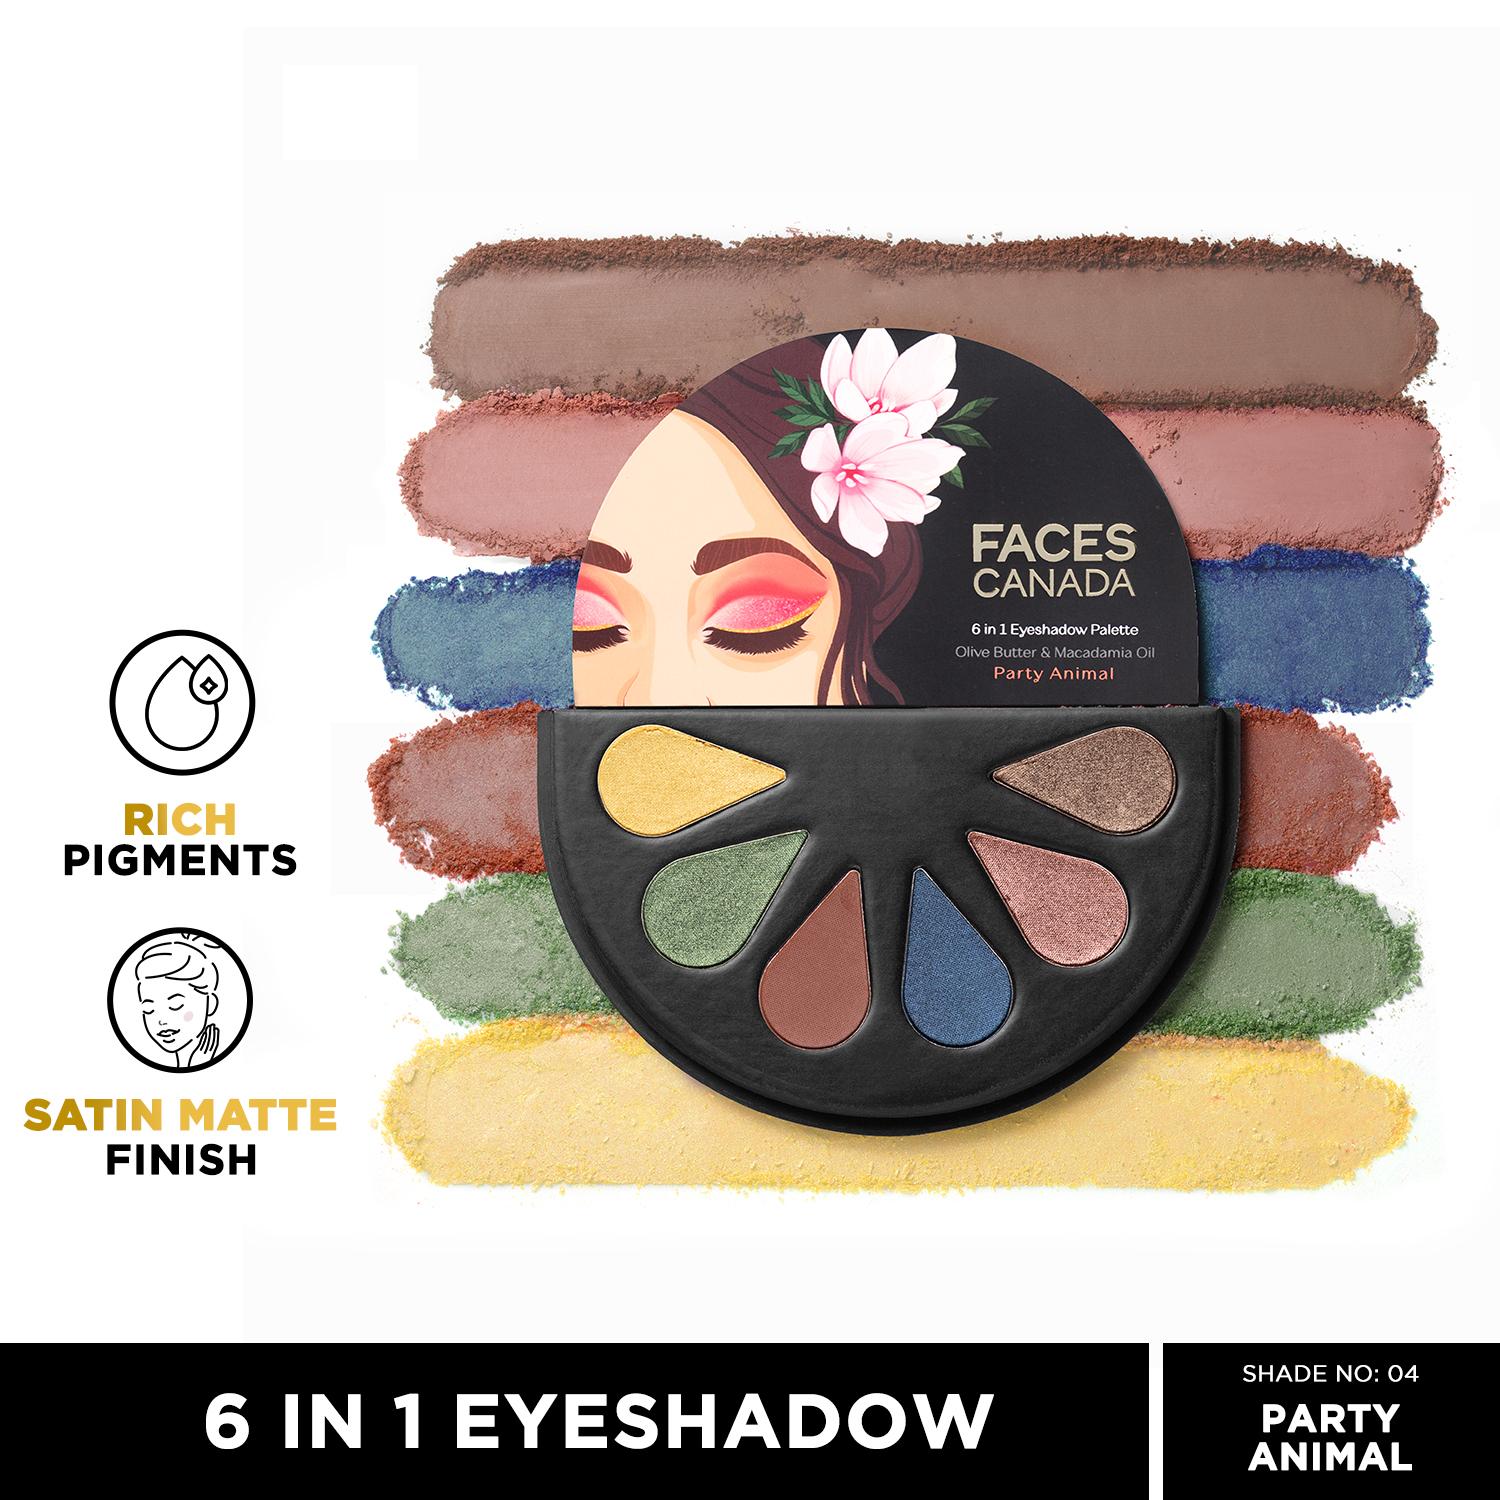 Faces Canada | Faces Canada 6 in 1 Eyeshadow Palette - Party Animal 04, Olive Butter & Macadamia Oil (6 g)